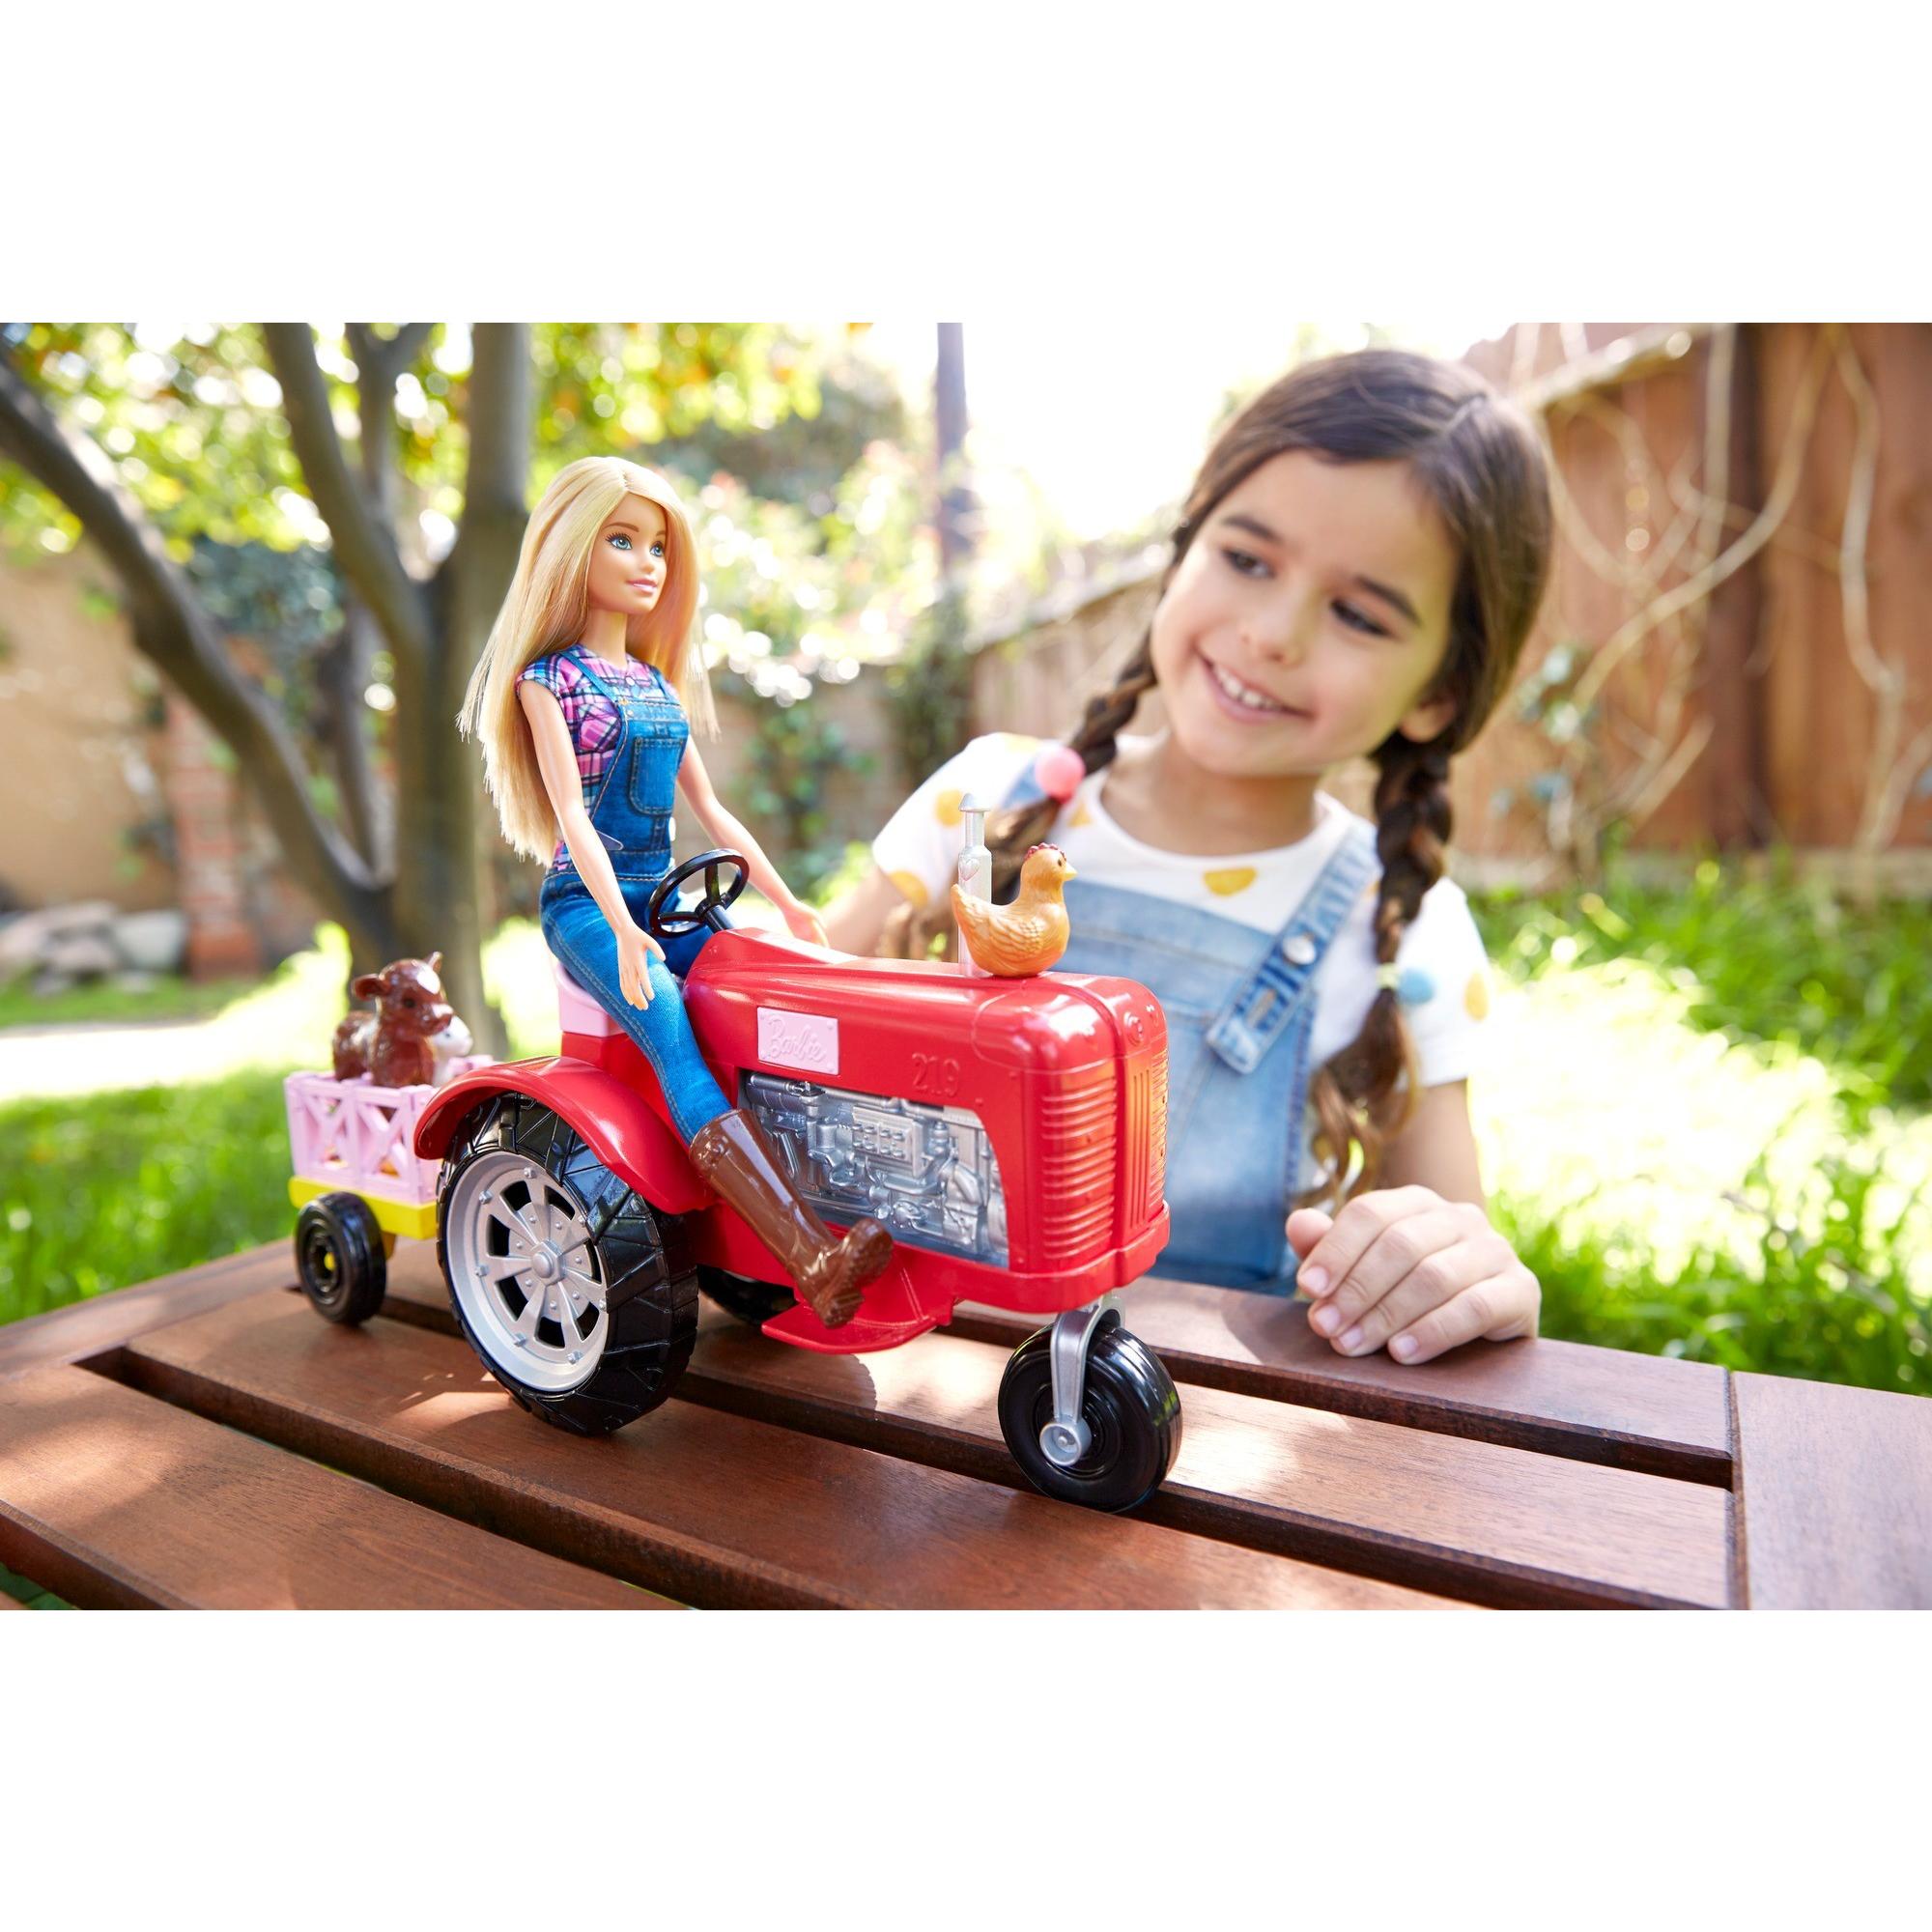 Barbie Careers Farmer Doll and Tractor with Themed Accessories - image 3 of 12